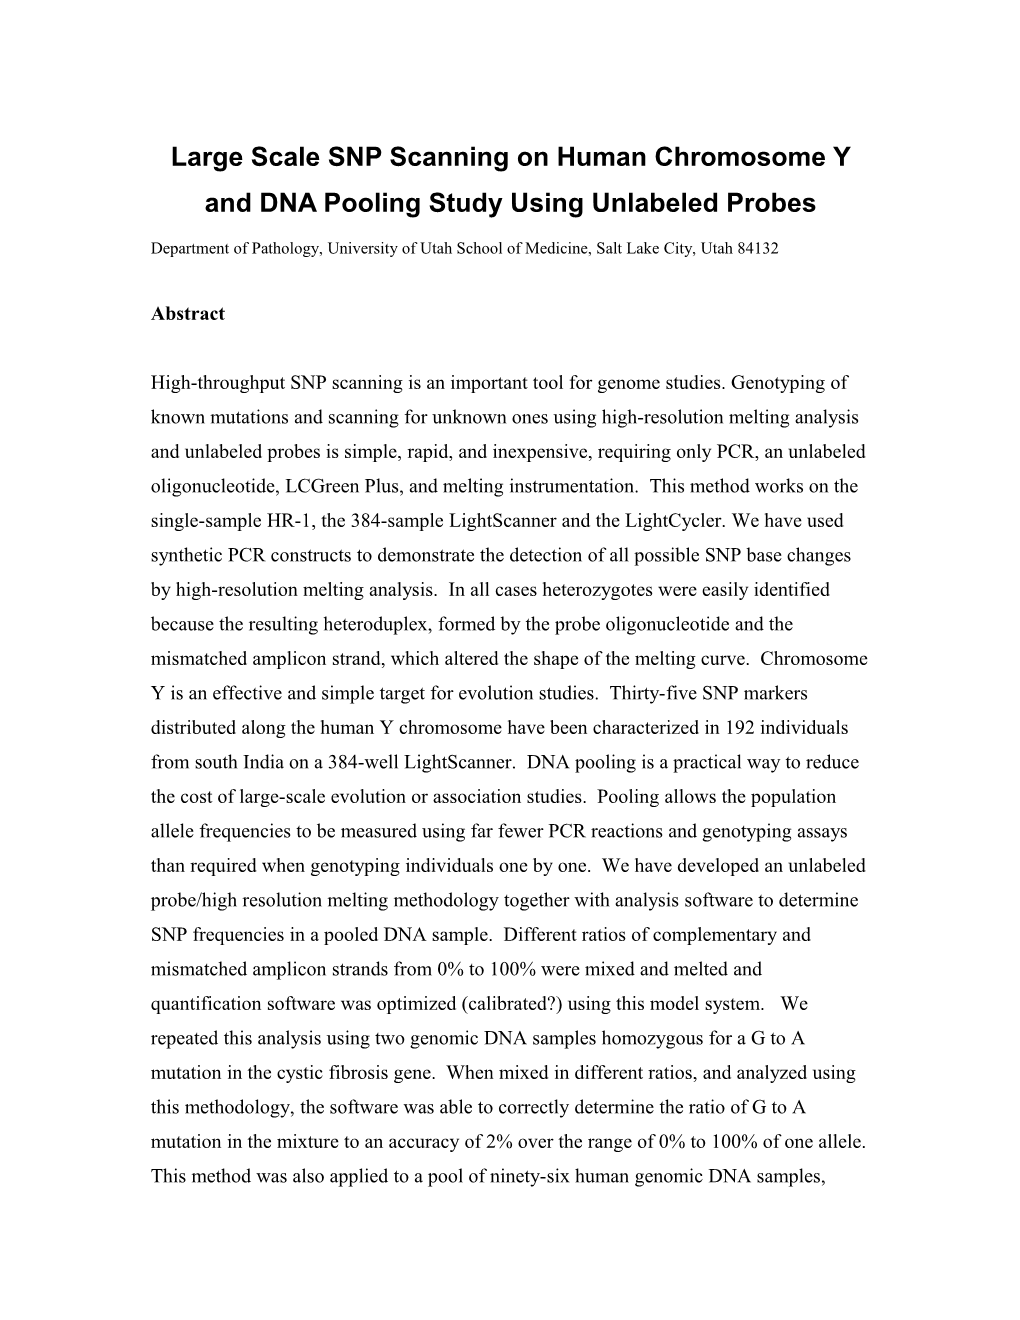 Large Scale SNP Scanning on Human Chromosome Y and DNA Pooling Study by Unlabeled Probe